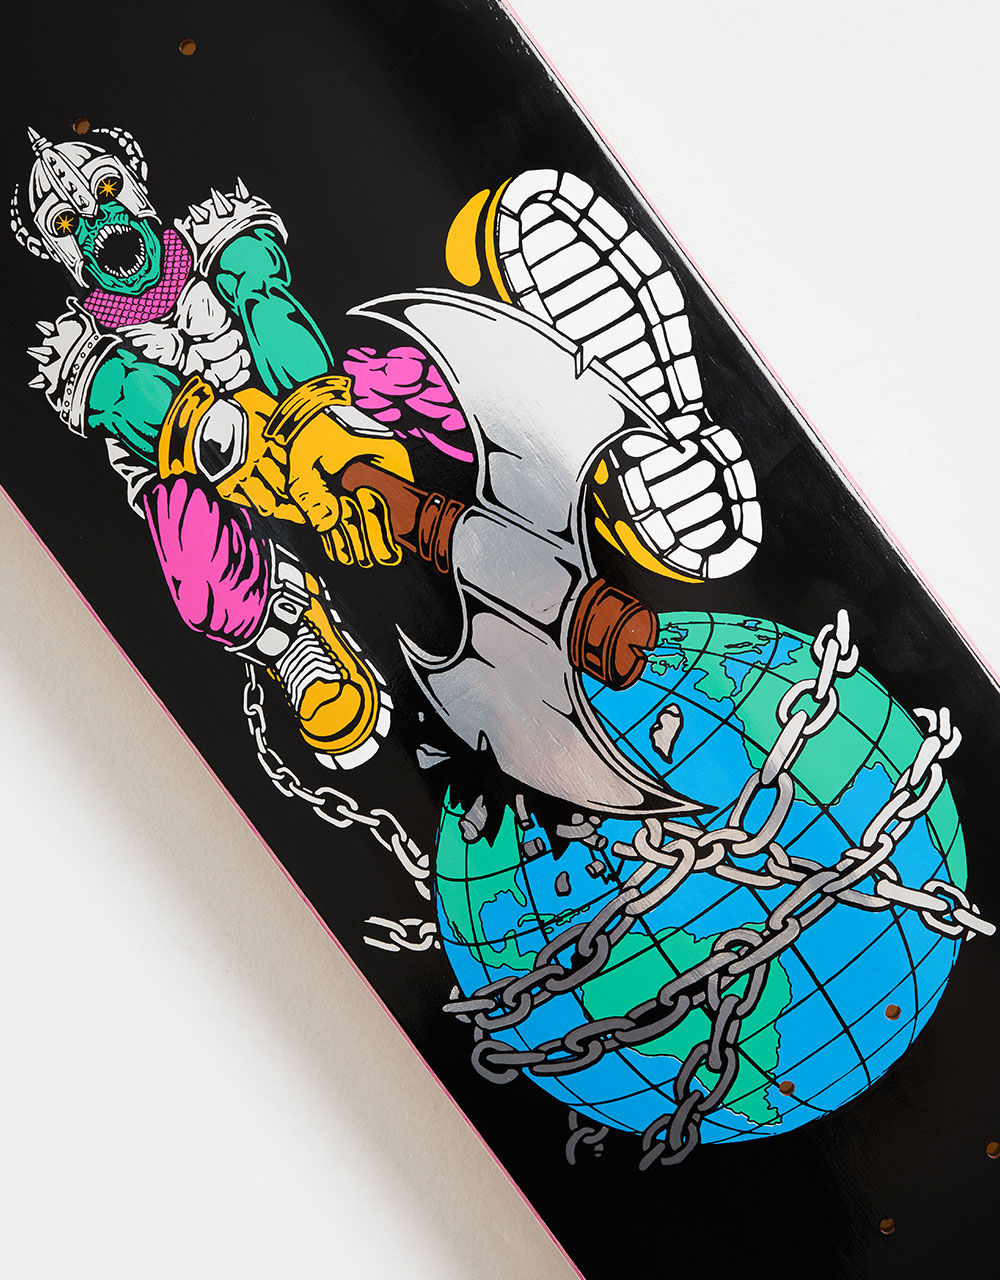 Welcome Unchained on Popsicle Skateboard Deck - 8.75"